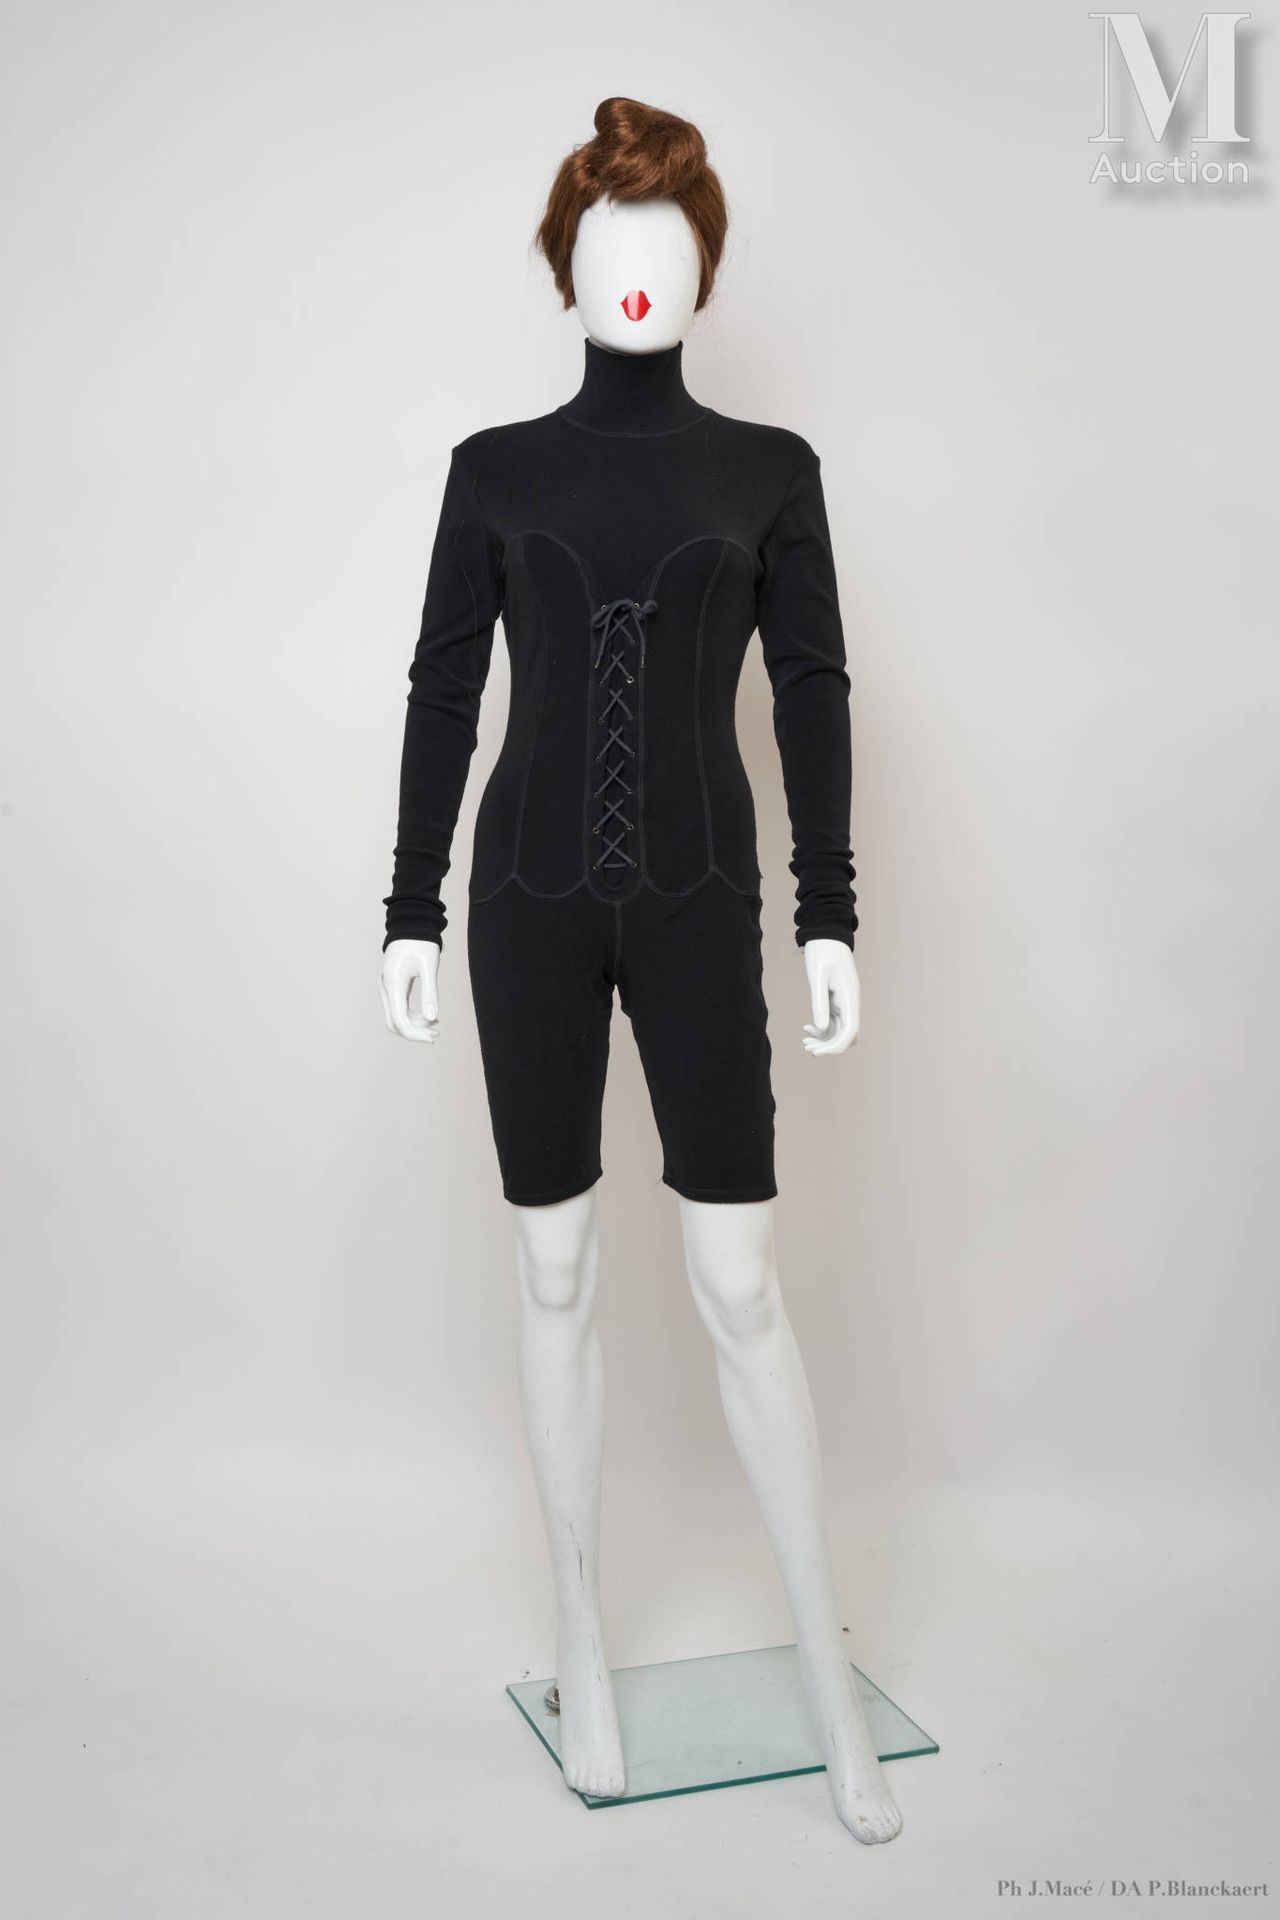 CHANTAL THOMASS - Circa 1990 Cycling suit
in black jersey featuring a trompe-l'o&hellip;